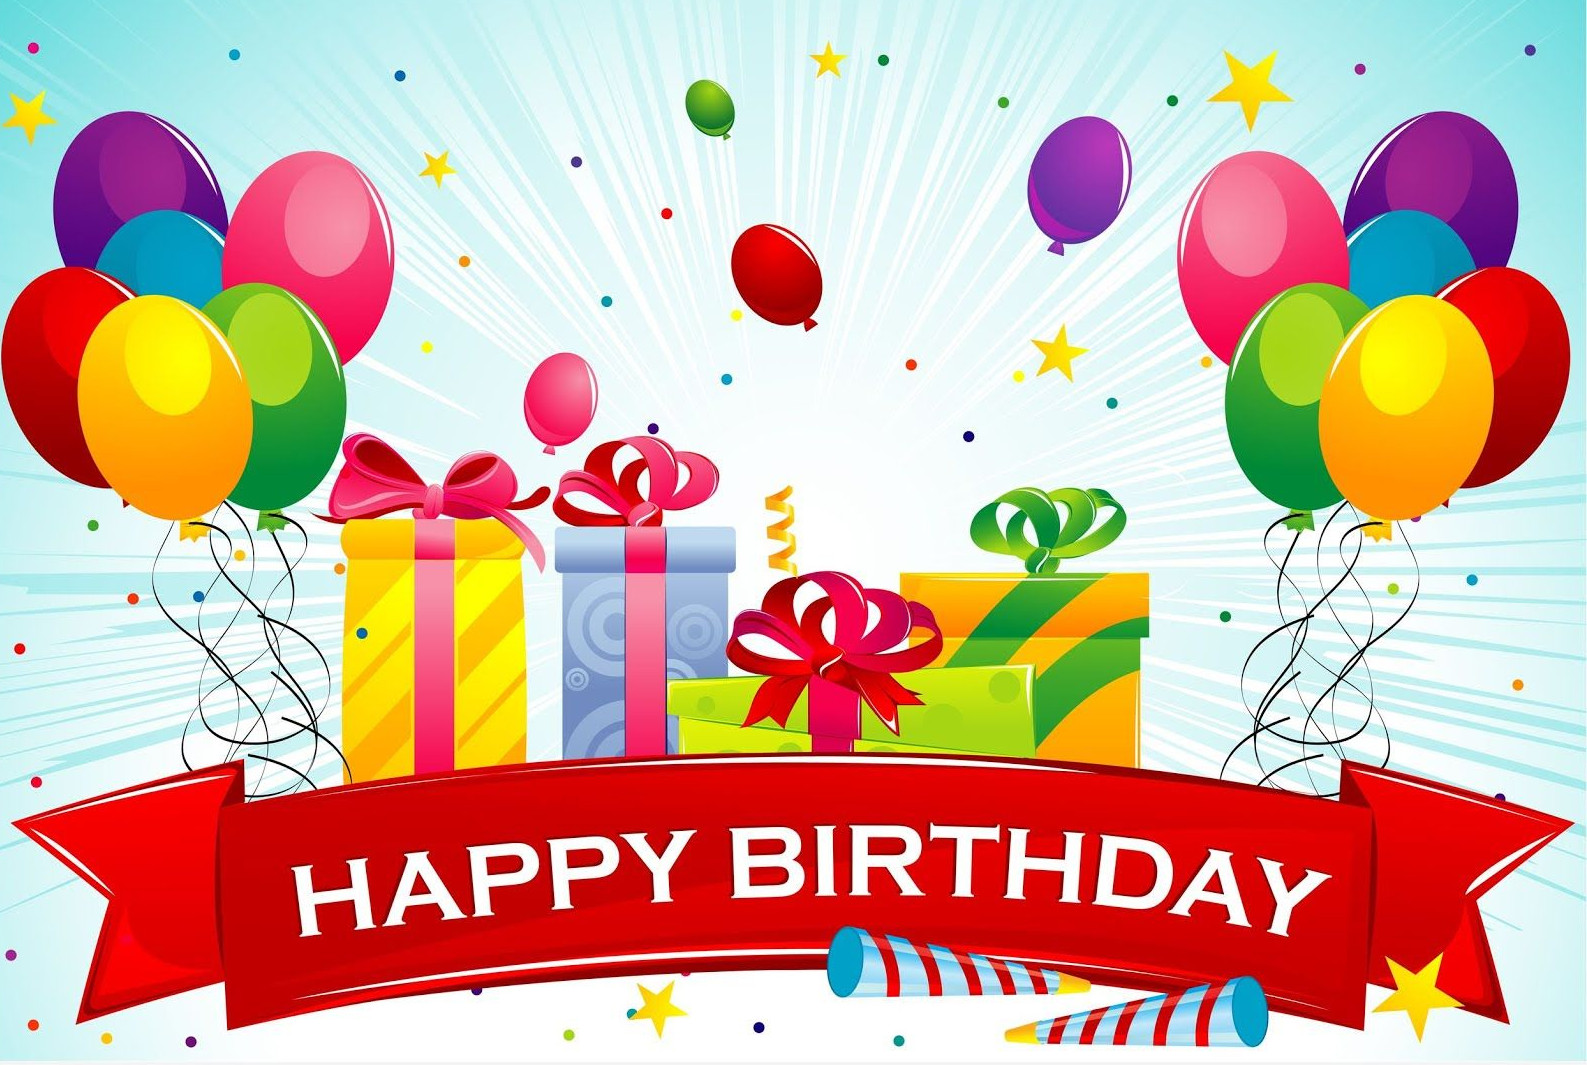 Happy Birthday Cards For Him
 35 Happy Birthday Cards Free To Download – The WoW Style